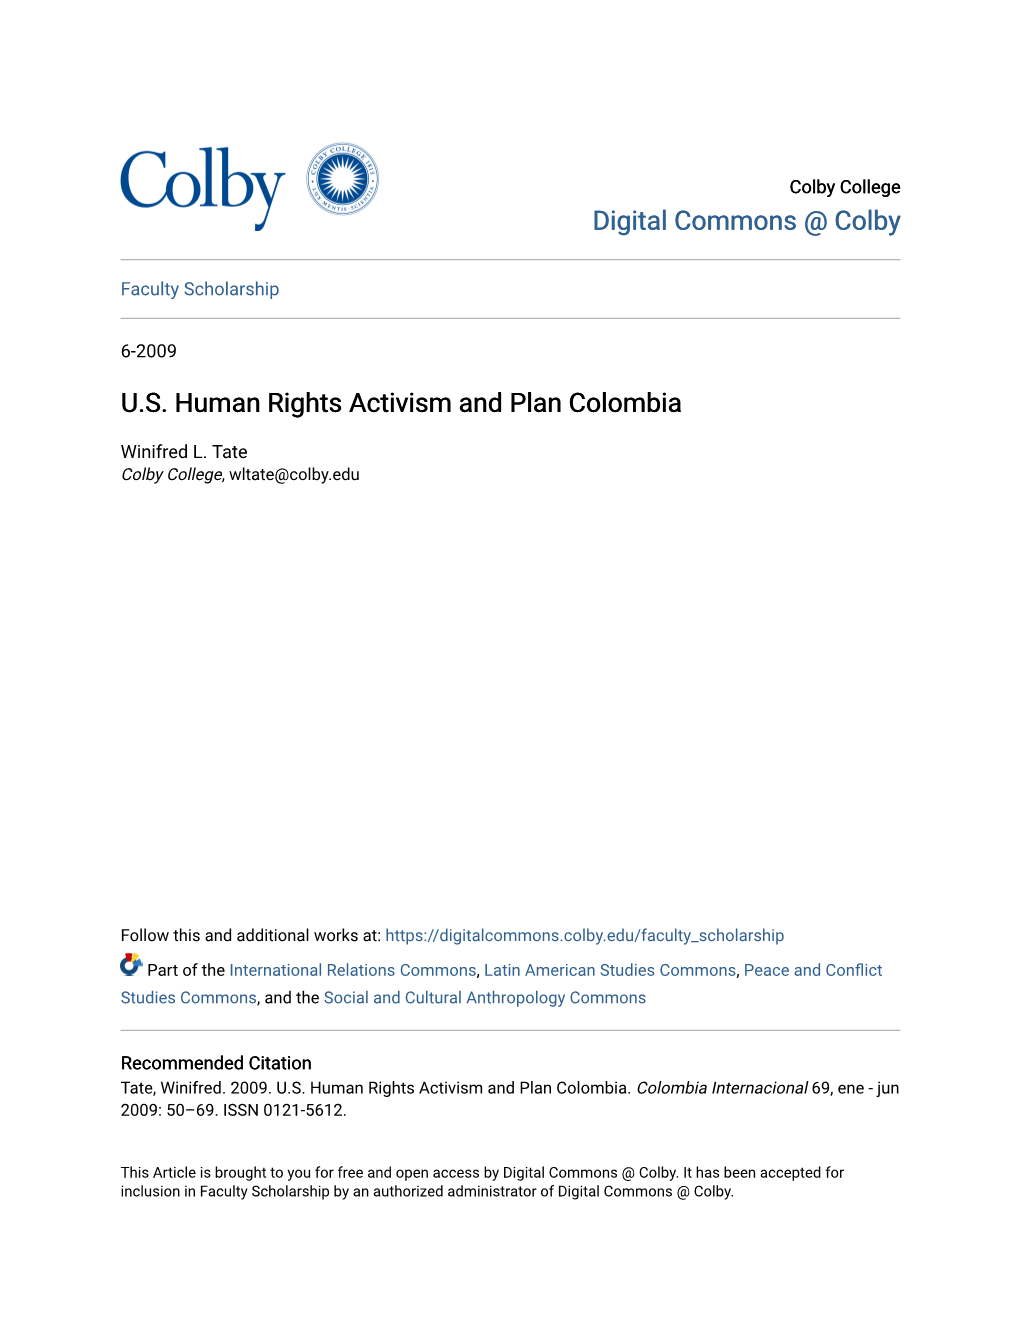 U.S. Human Rights Activism and Plan Colombia